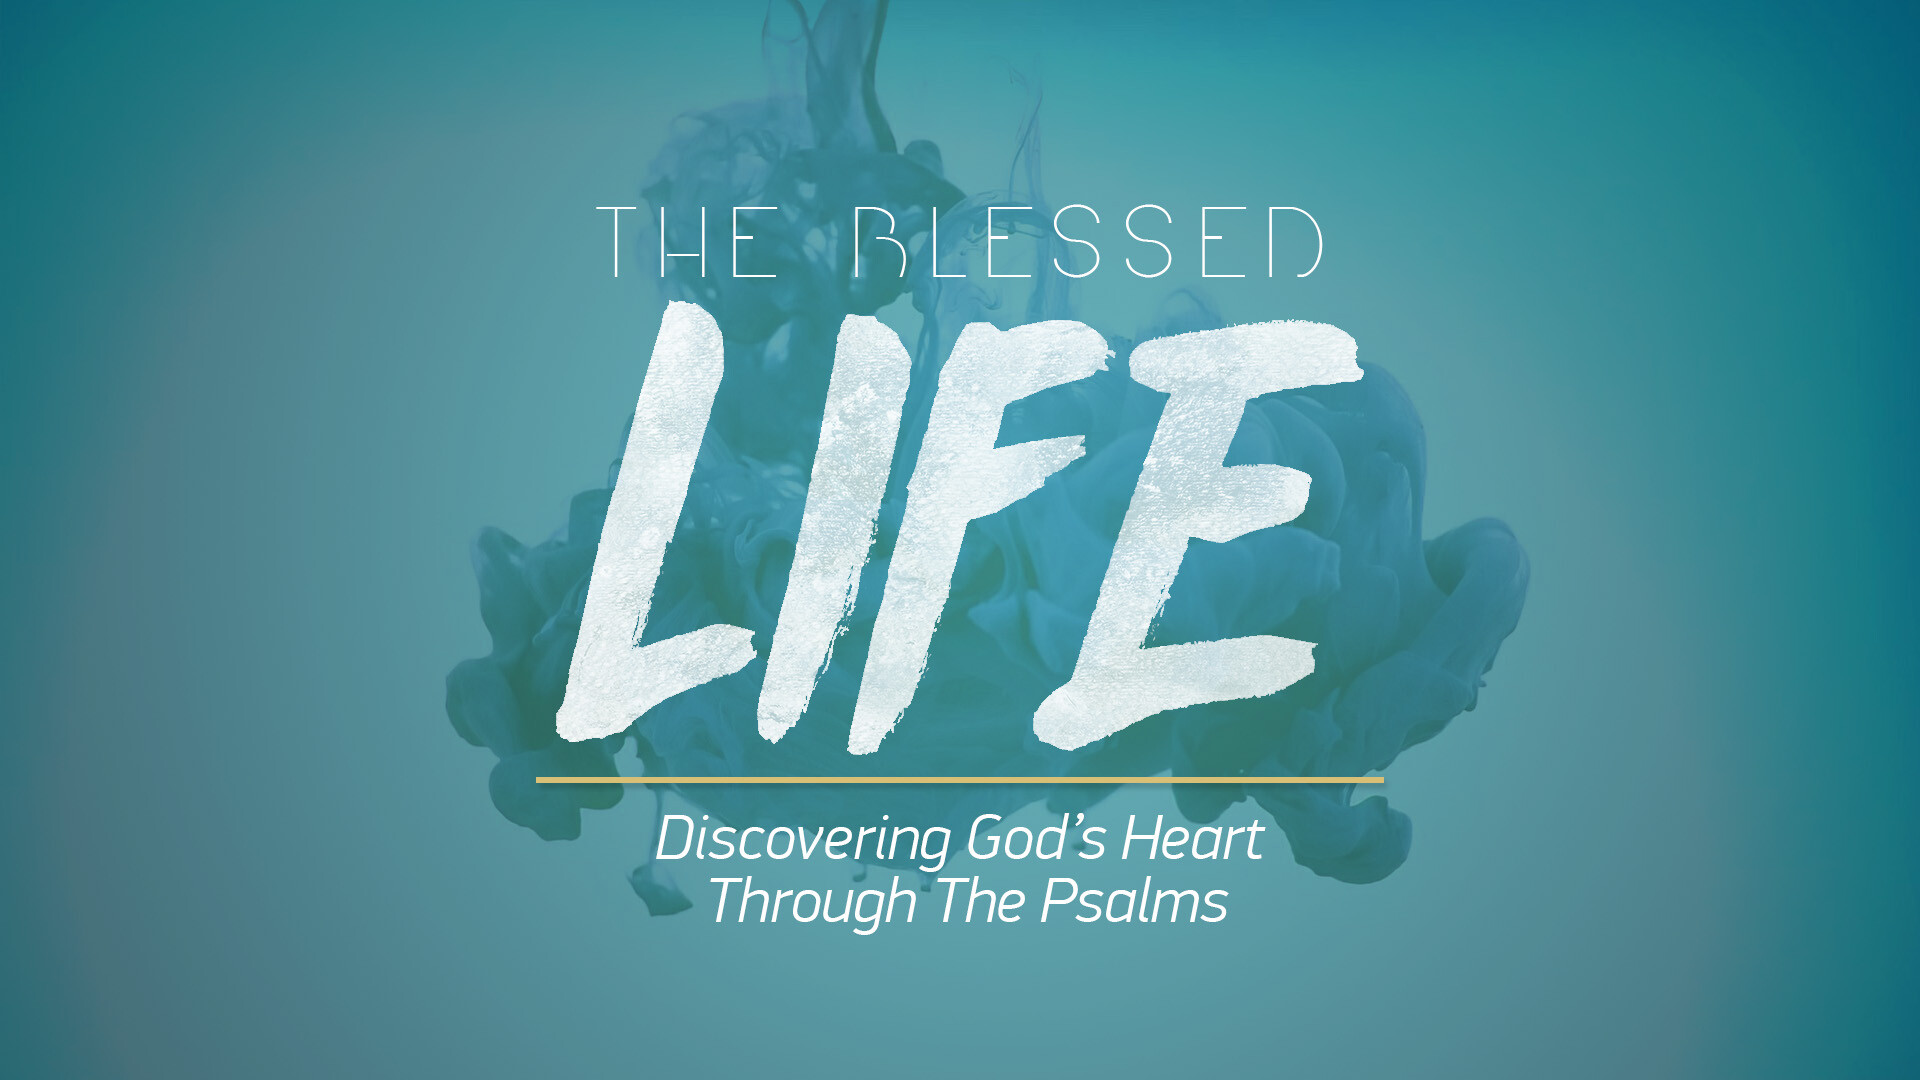 The Blessed Life: Discovering God's Heart Through The Psalms